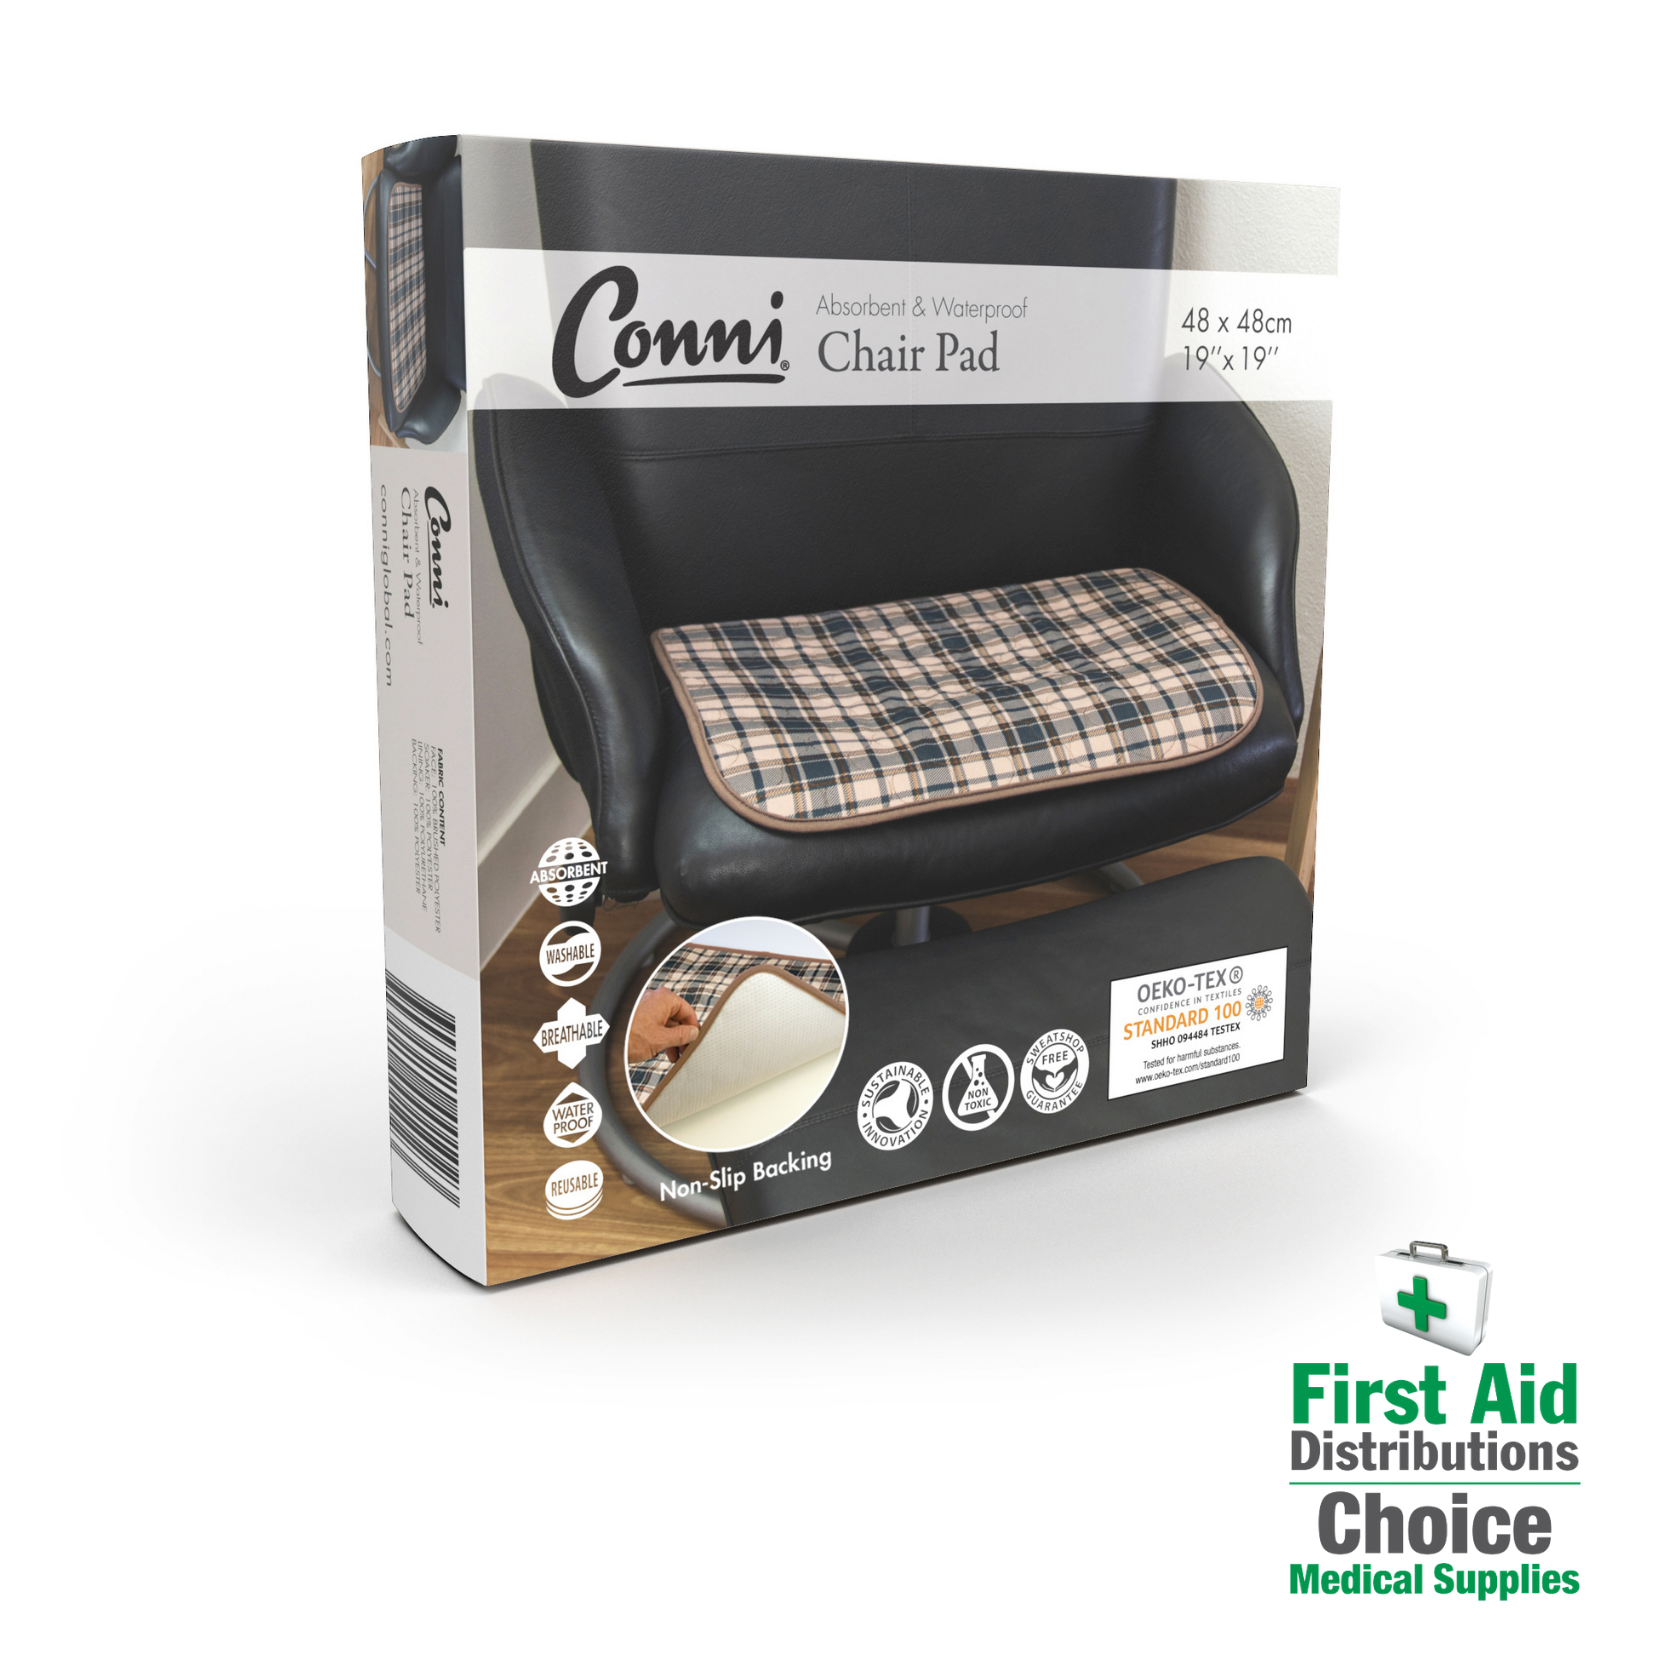 collections/Conni_Chair_Pad_Small_Tartan_First_Aid_Distributions.png